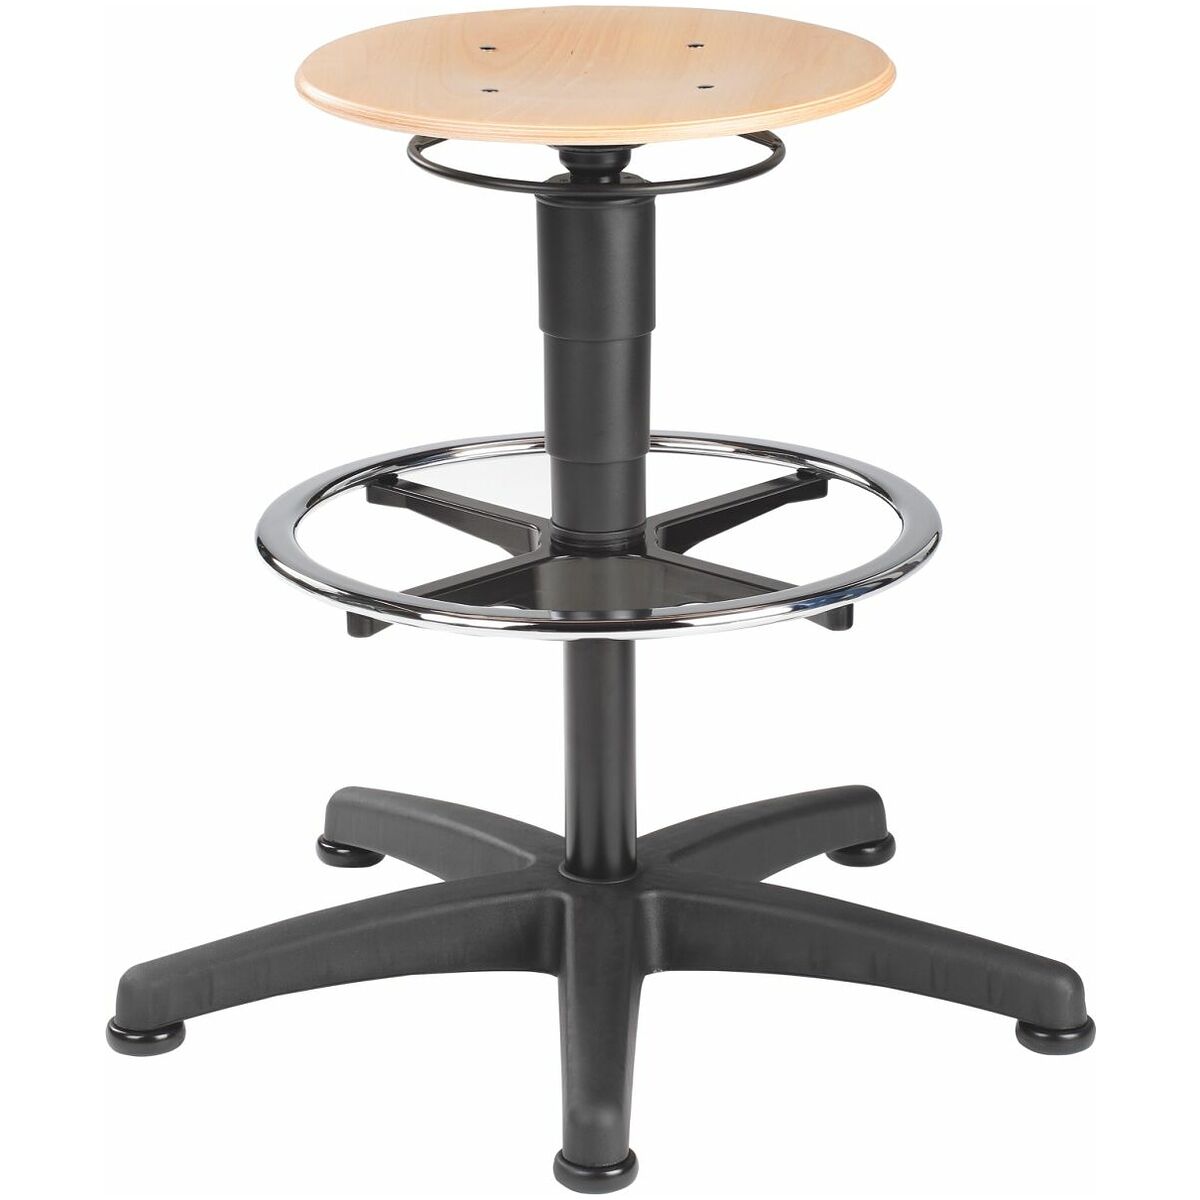 Swivel Stool With Glides And Footrest, How To Lubricate A Swivel Bar Stool